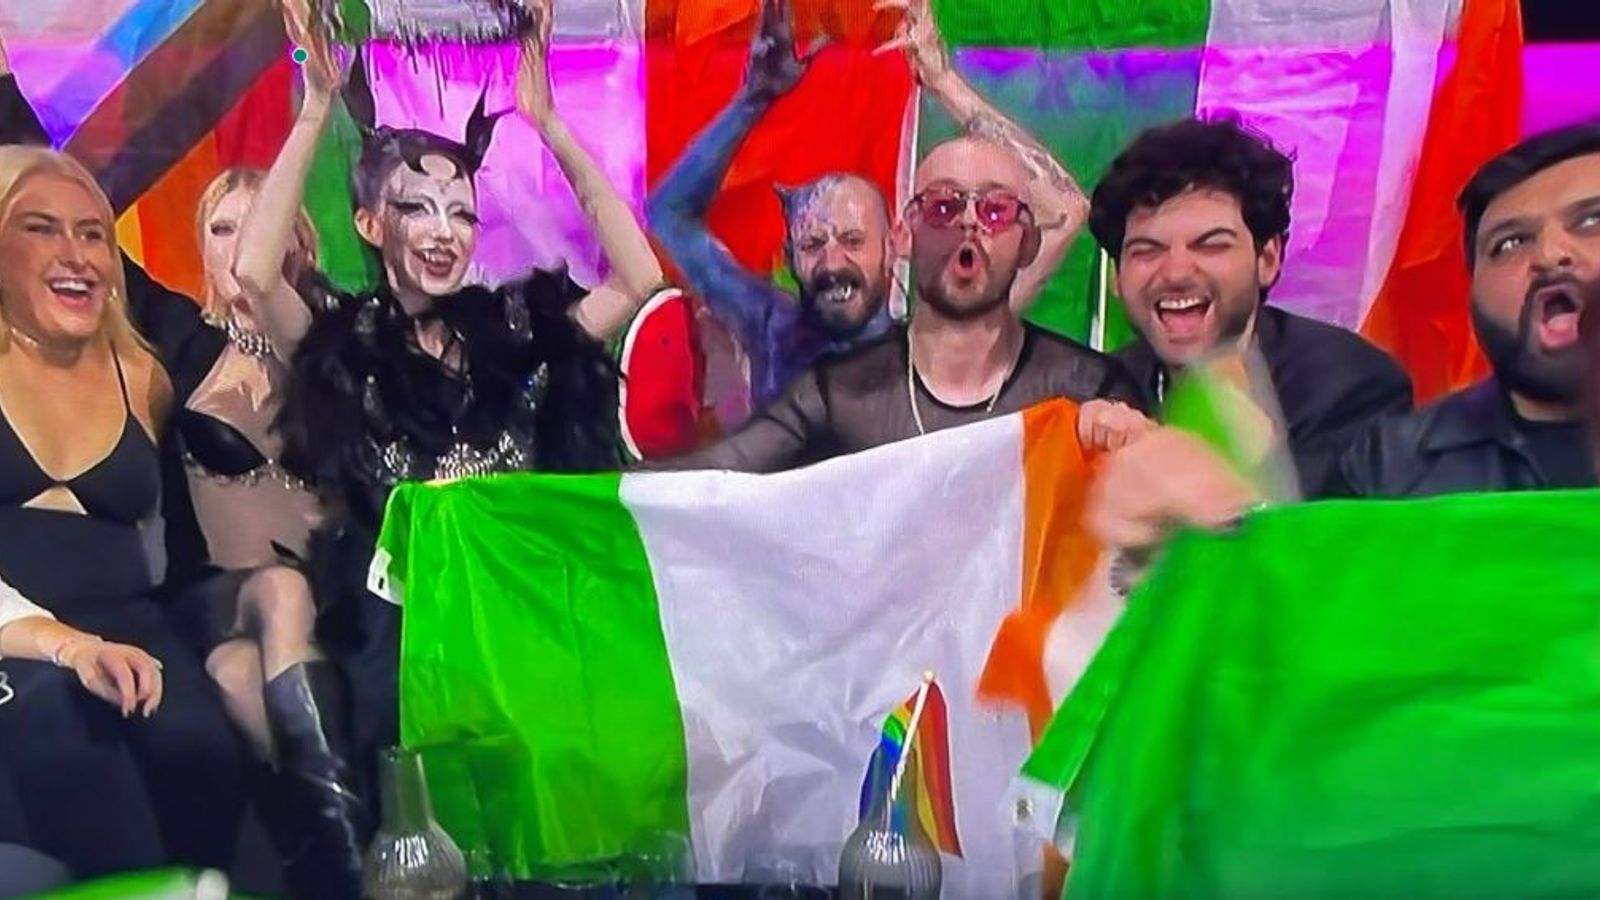 A wardrobe malfunction, a watermelon and nul points: Five Eurovision moments you might have missed